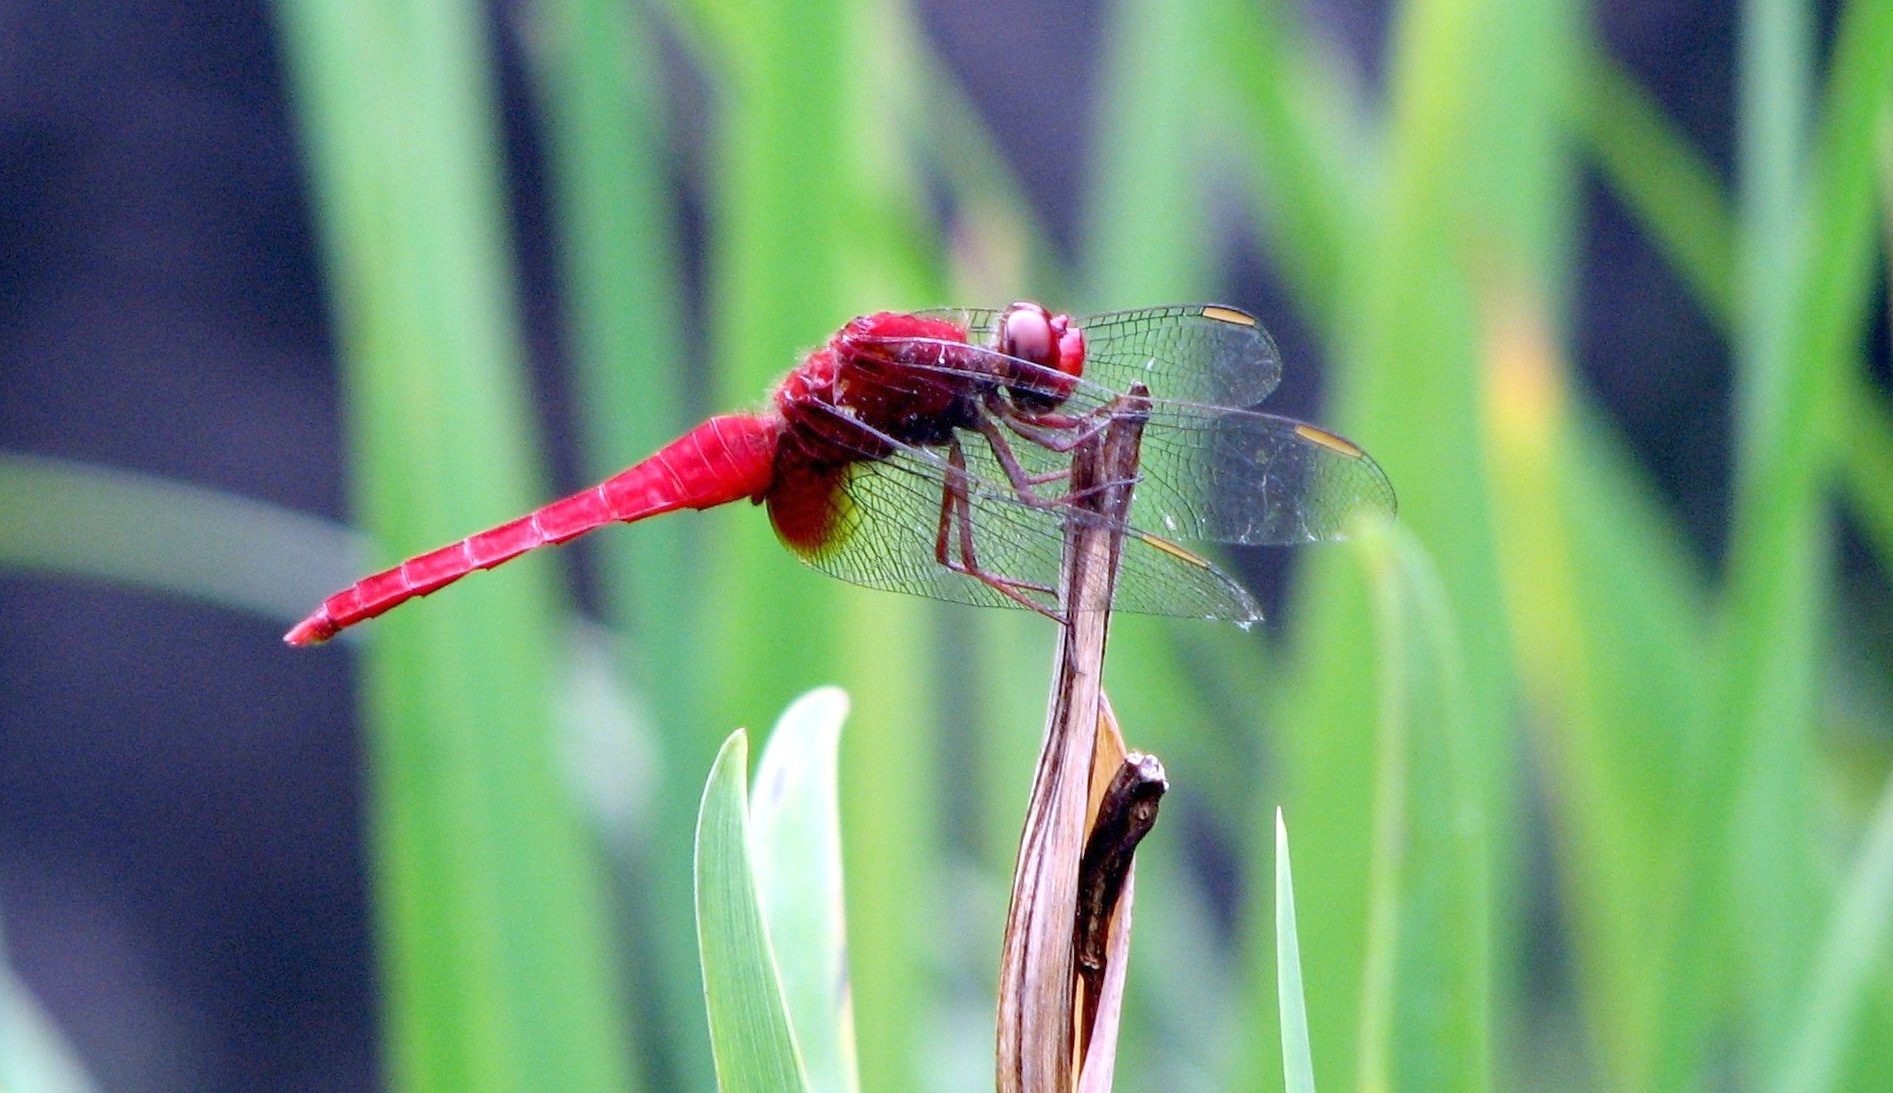 File:Red dragonfly in Tokyo, Japan.jpg - Wikimedia Commons